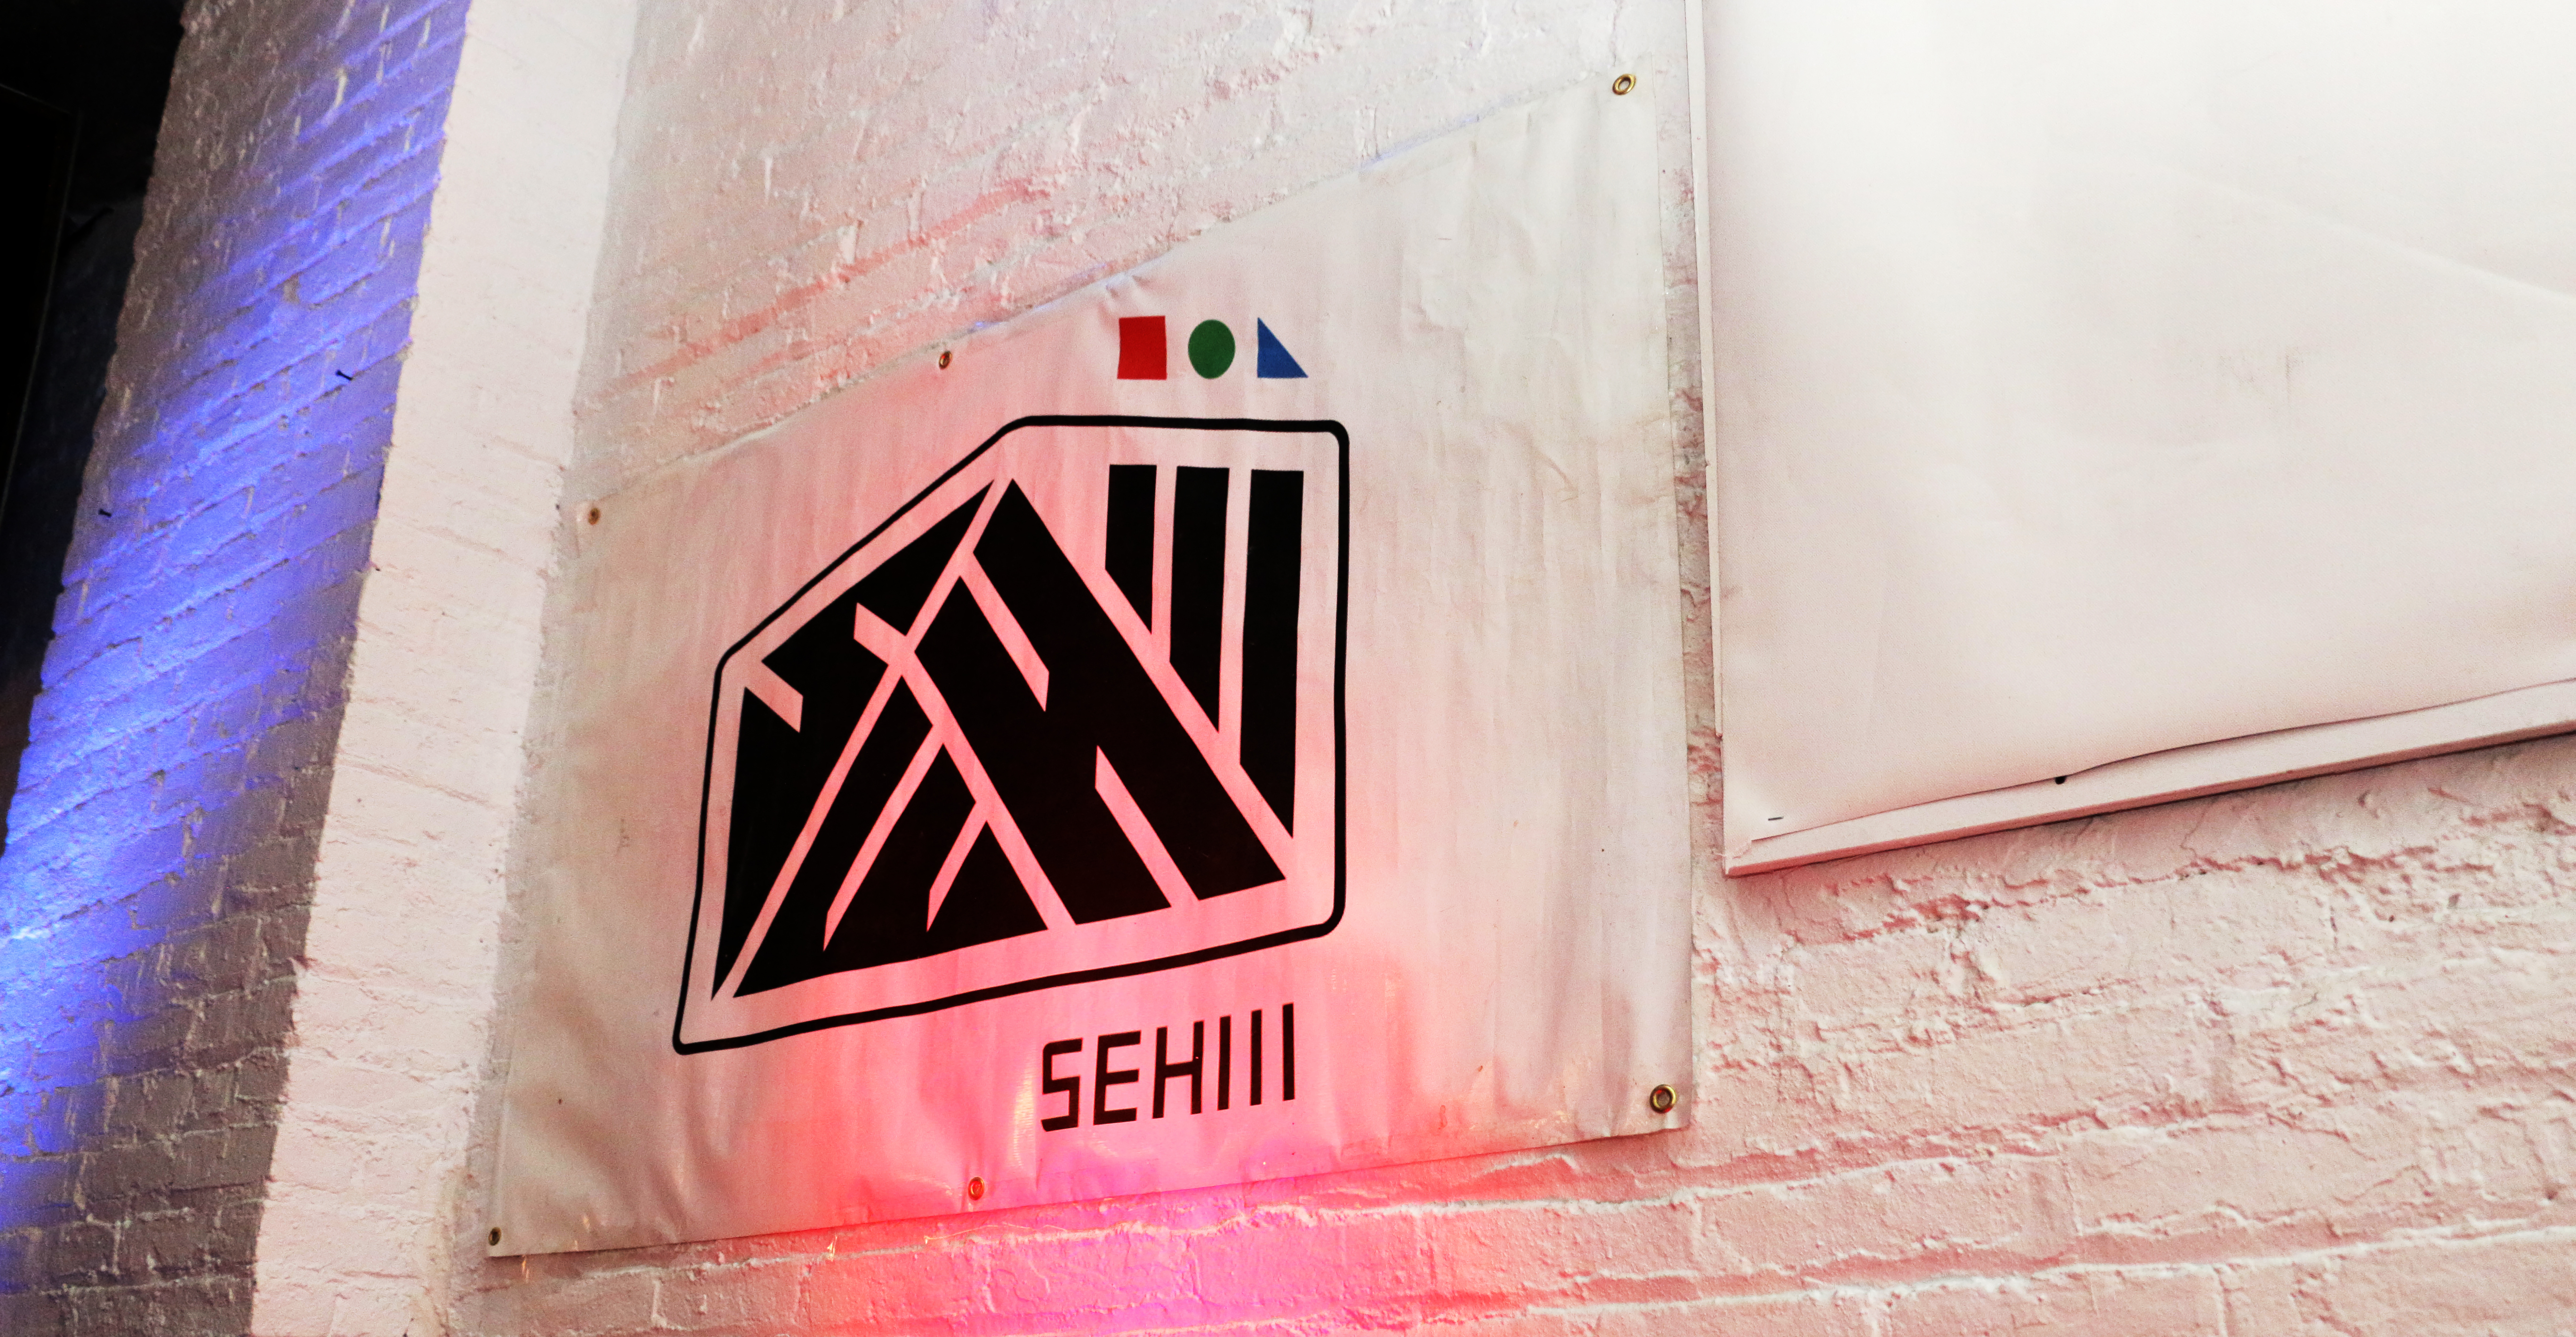 [Photos From Last Night] Sehiii Moves to Bigger Venue and the Good Vibes Continue